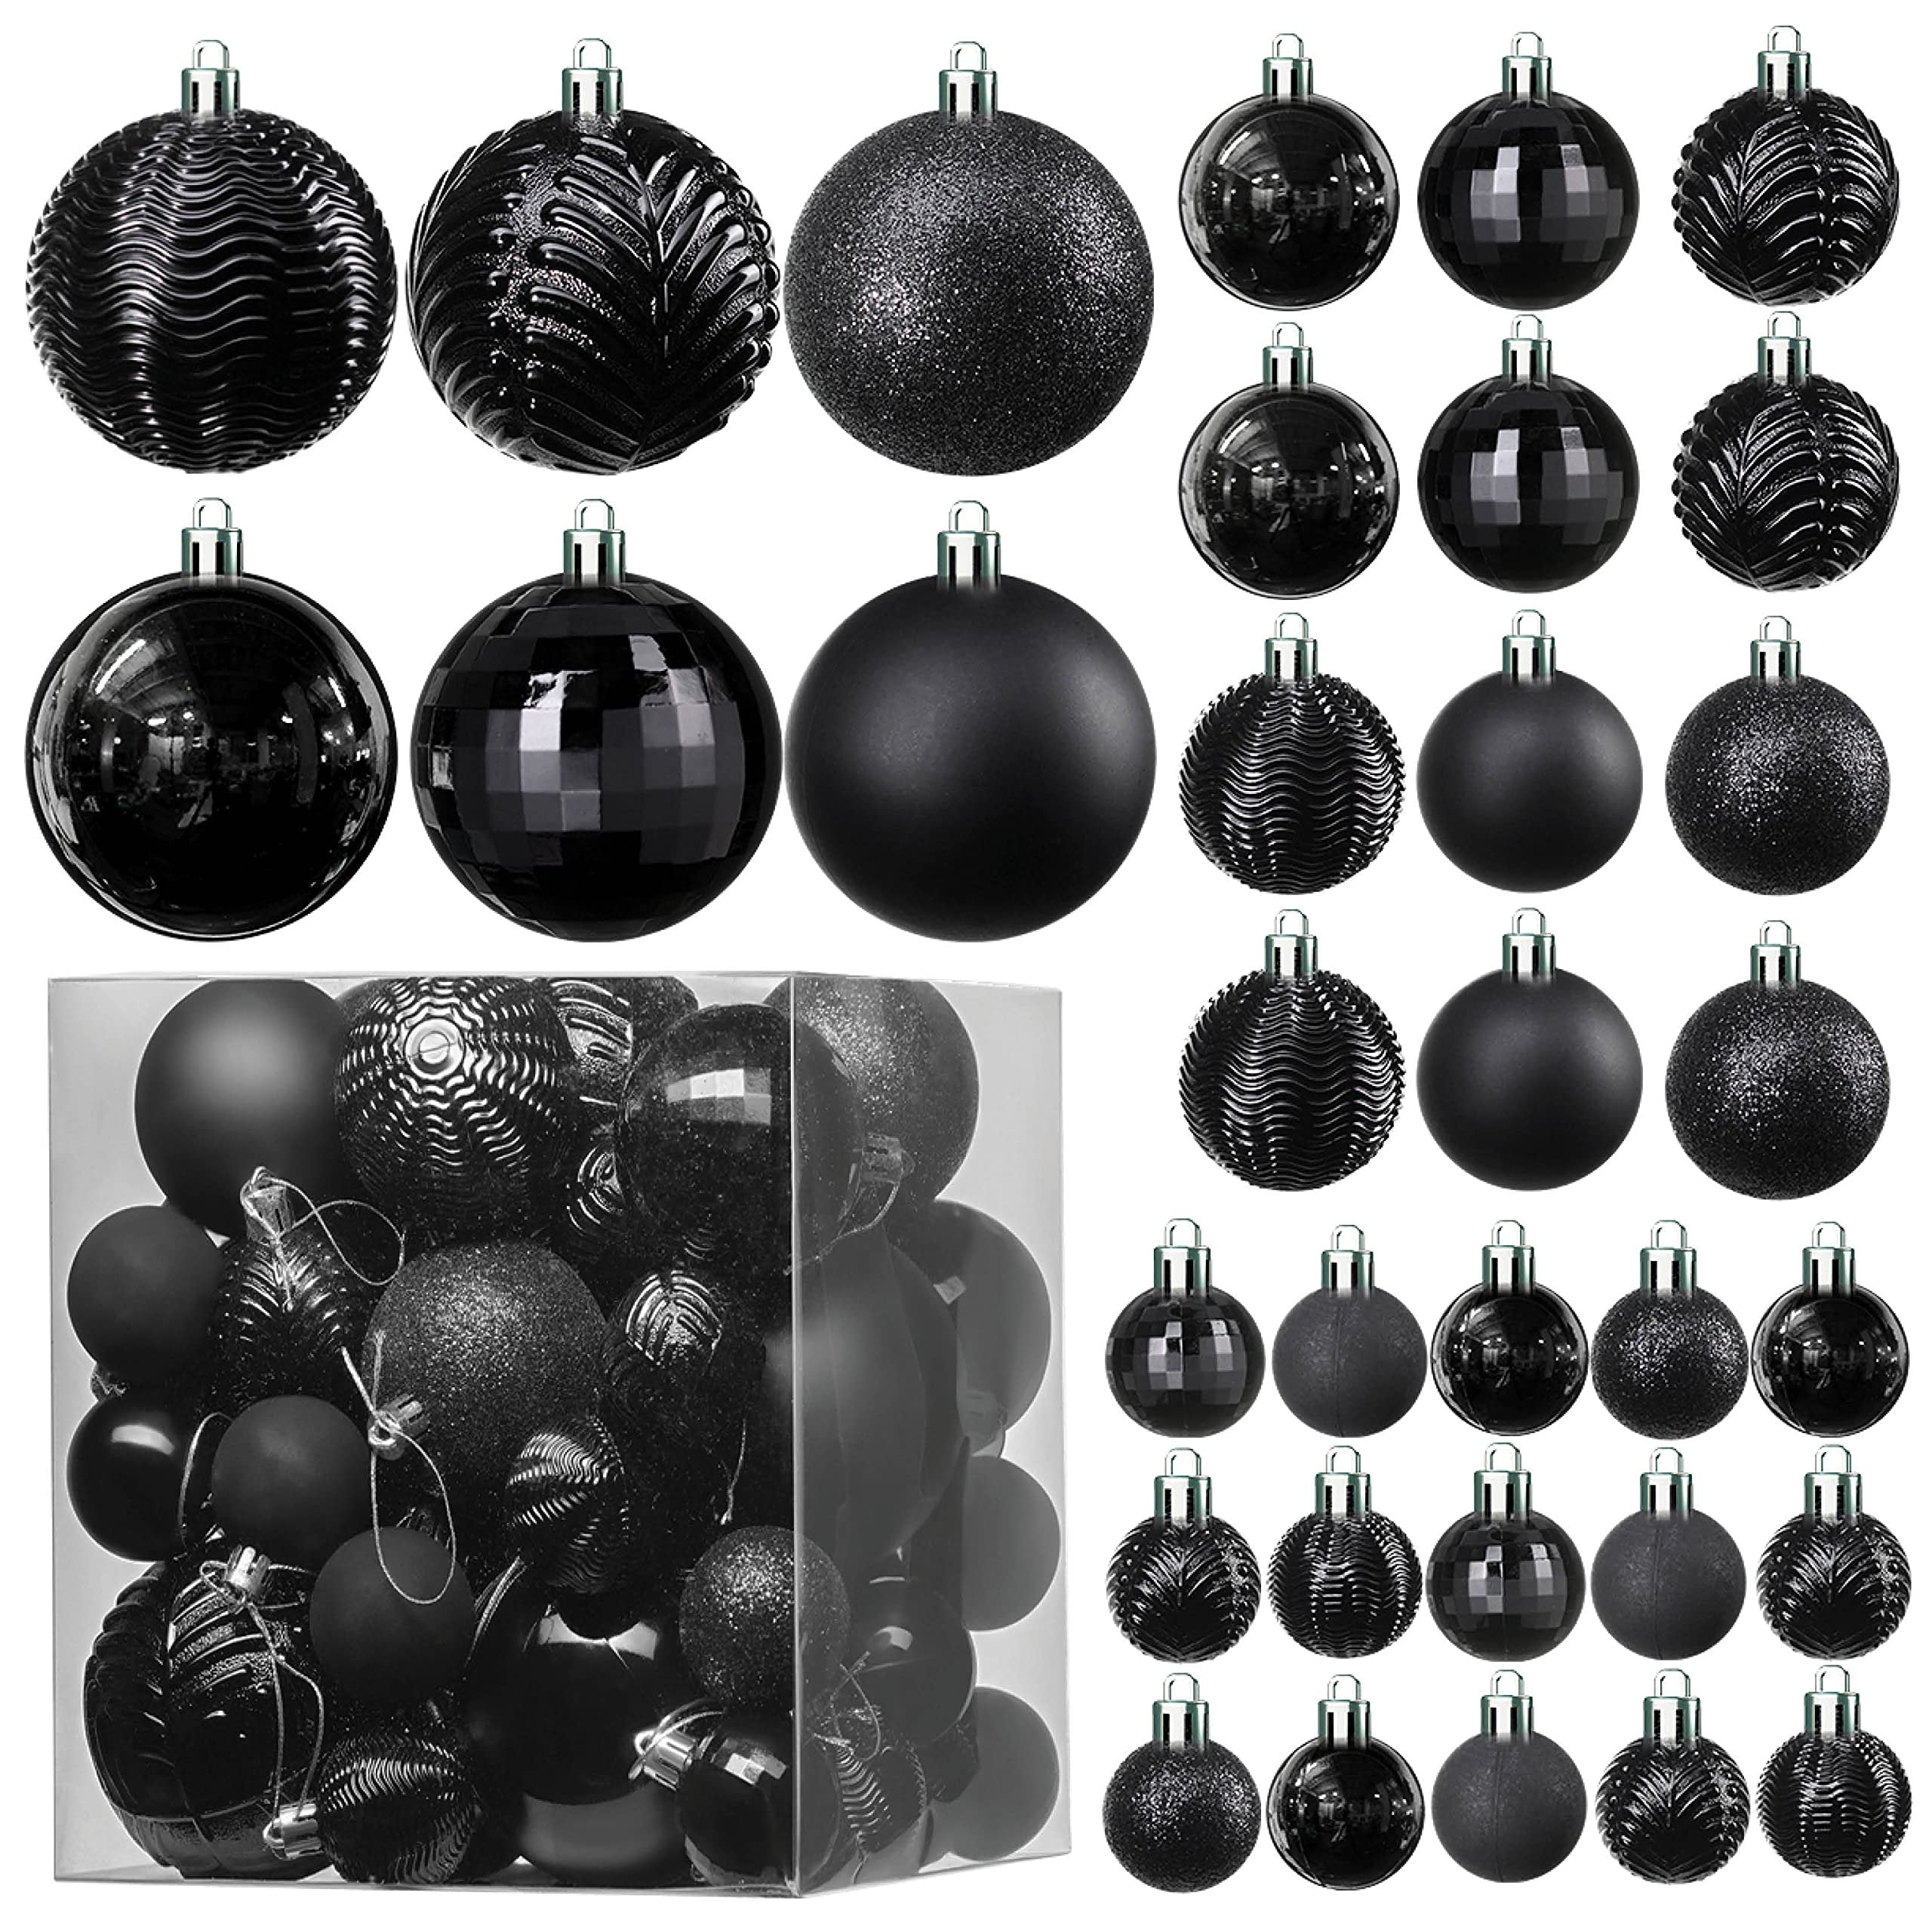 Prextex Christmas Ball Black Ornaments for Christmas Decorations (Black) - 36 pcs Shatterproof Black Christmas Ornaments w/Hanging Loop for Holiday, Wreath & Party Decorations (6 Styles, 3 Sizes)